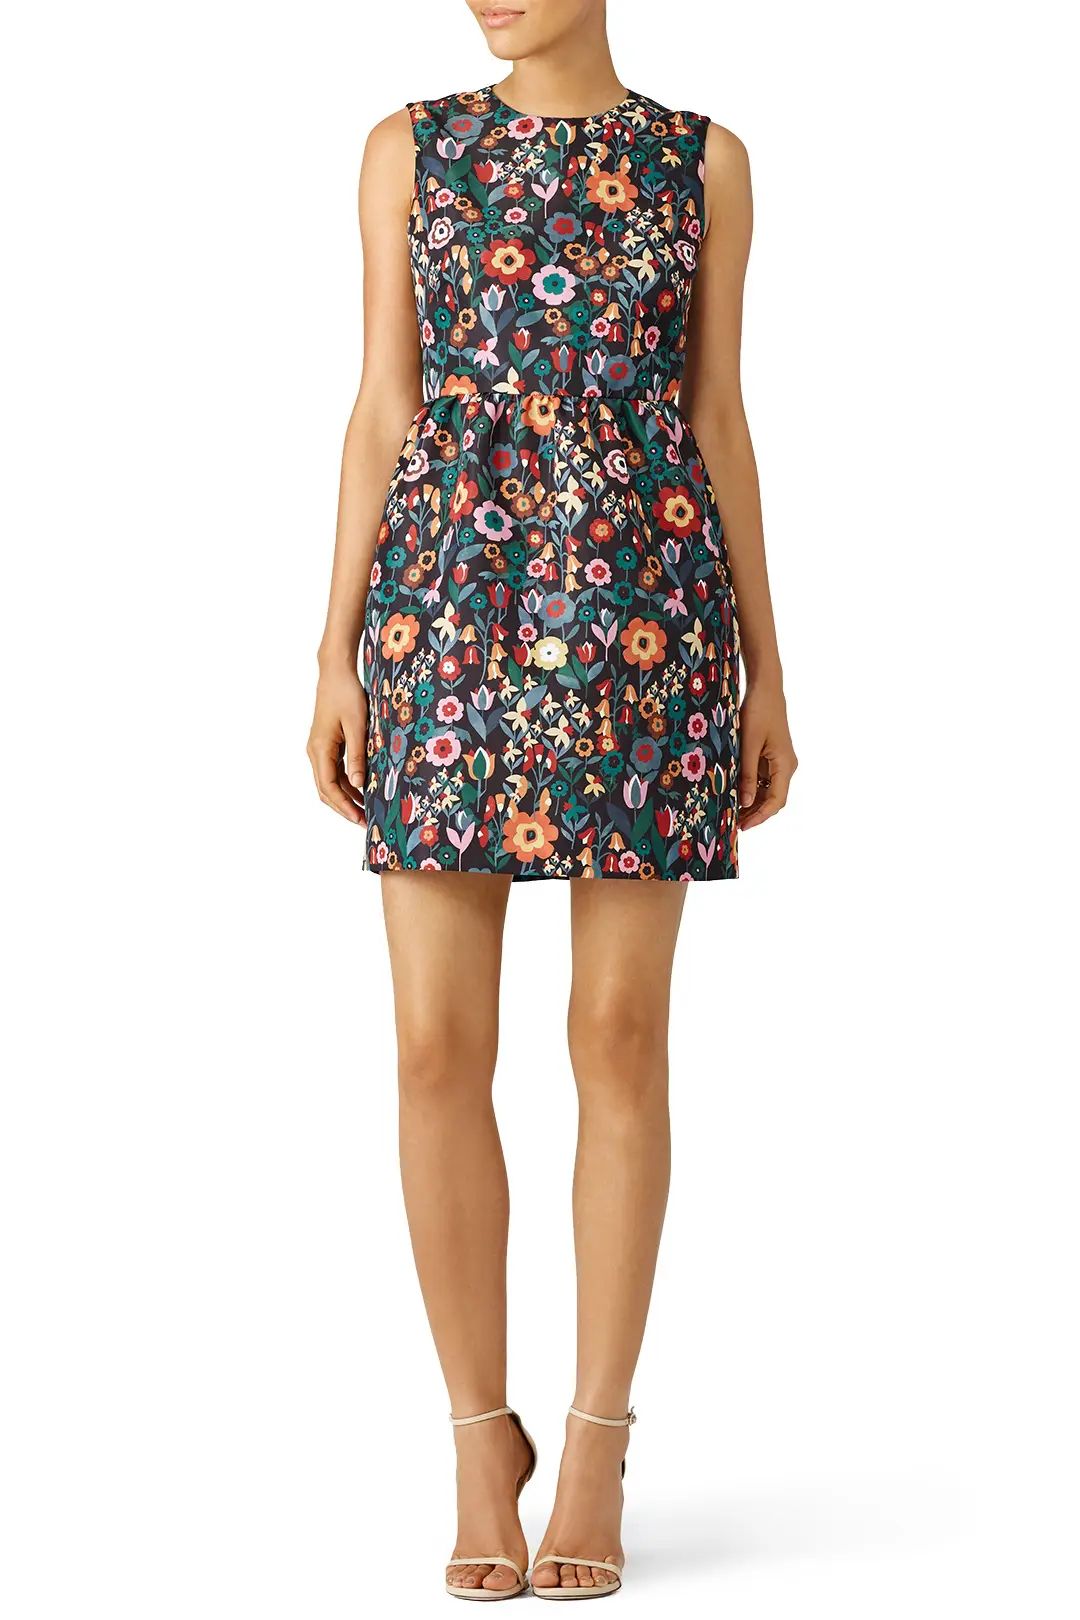 RED Valentino Fancy Flower Printed Dress | Rent The Runway